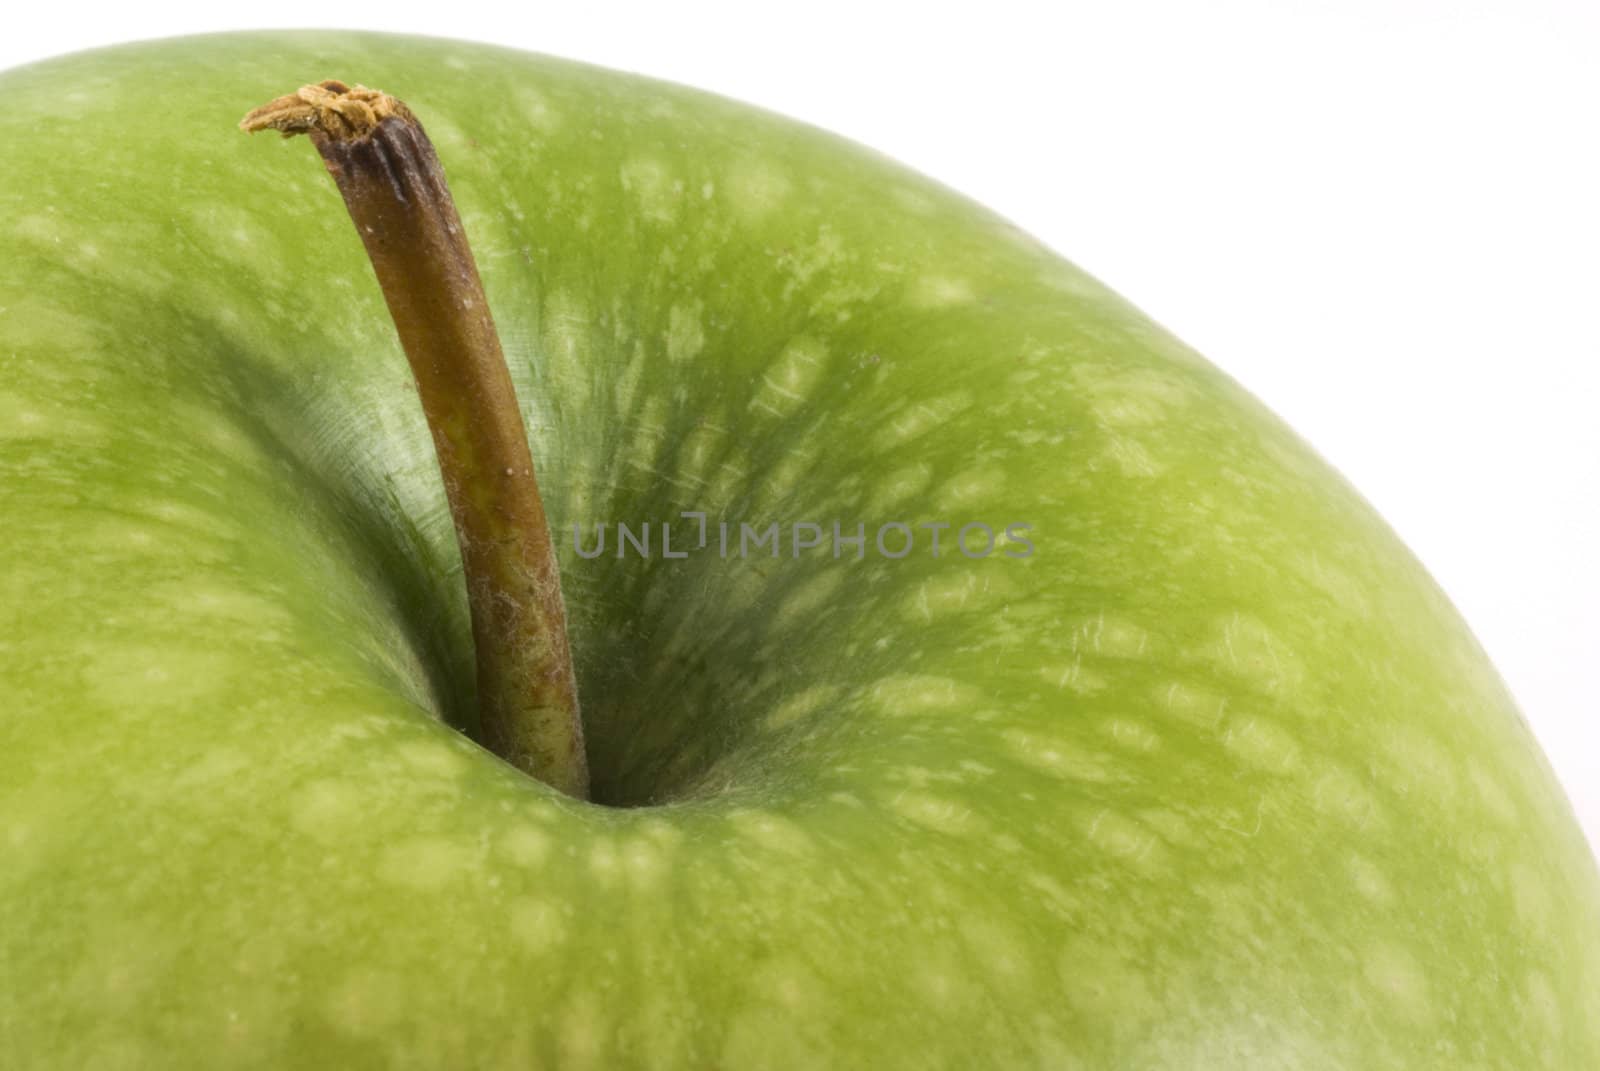 Part of a delicious green apple isolated on white.